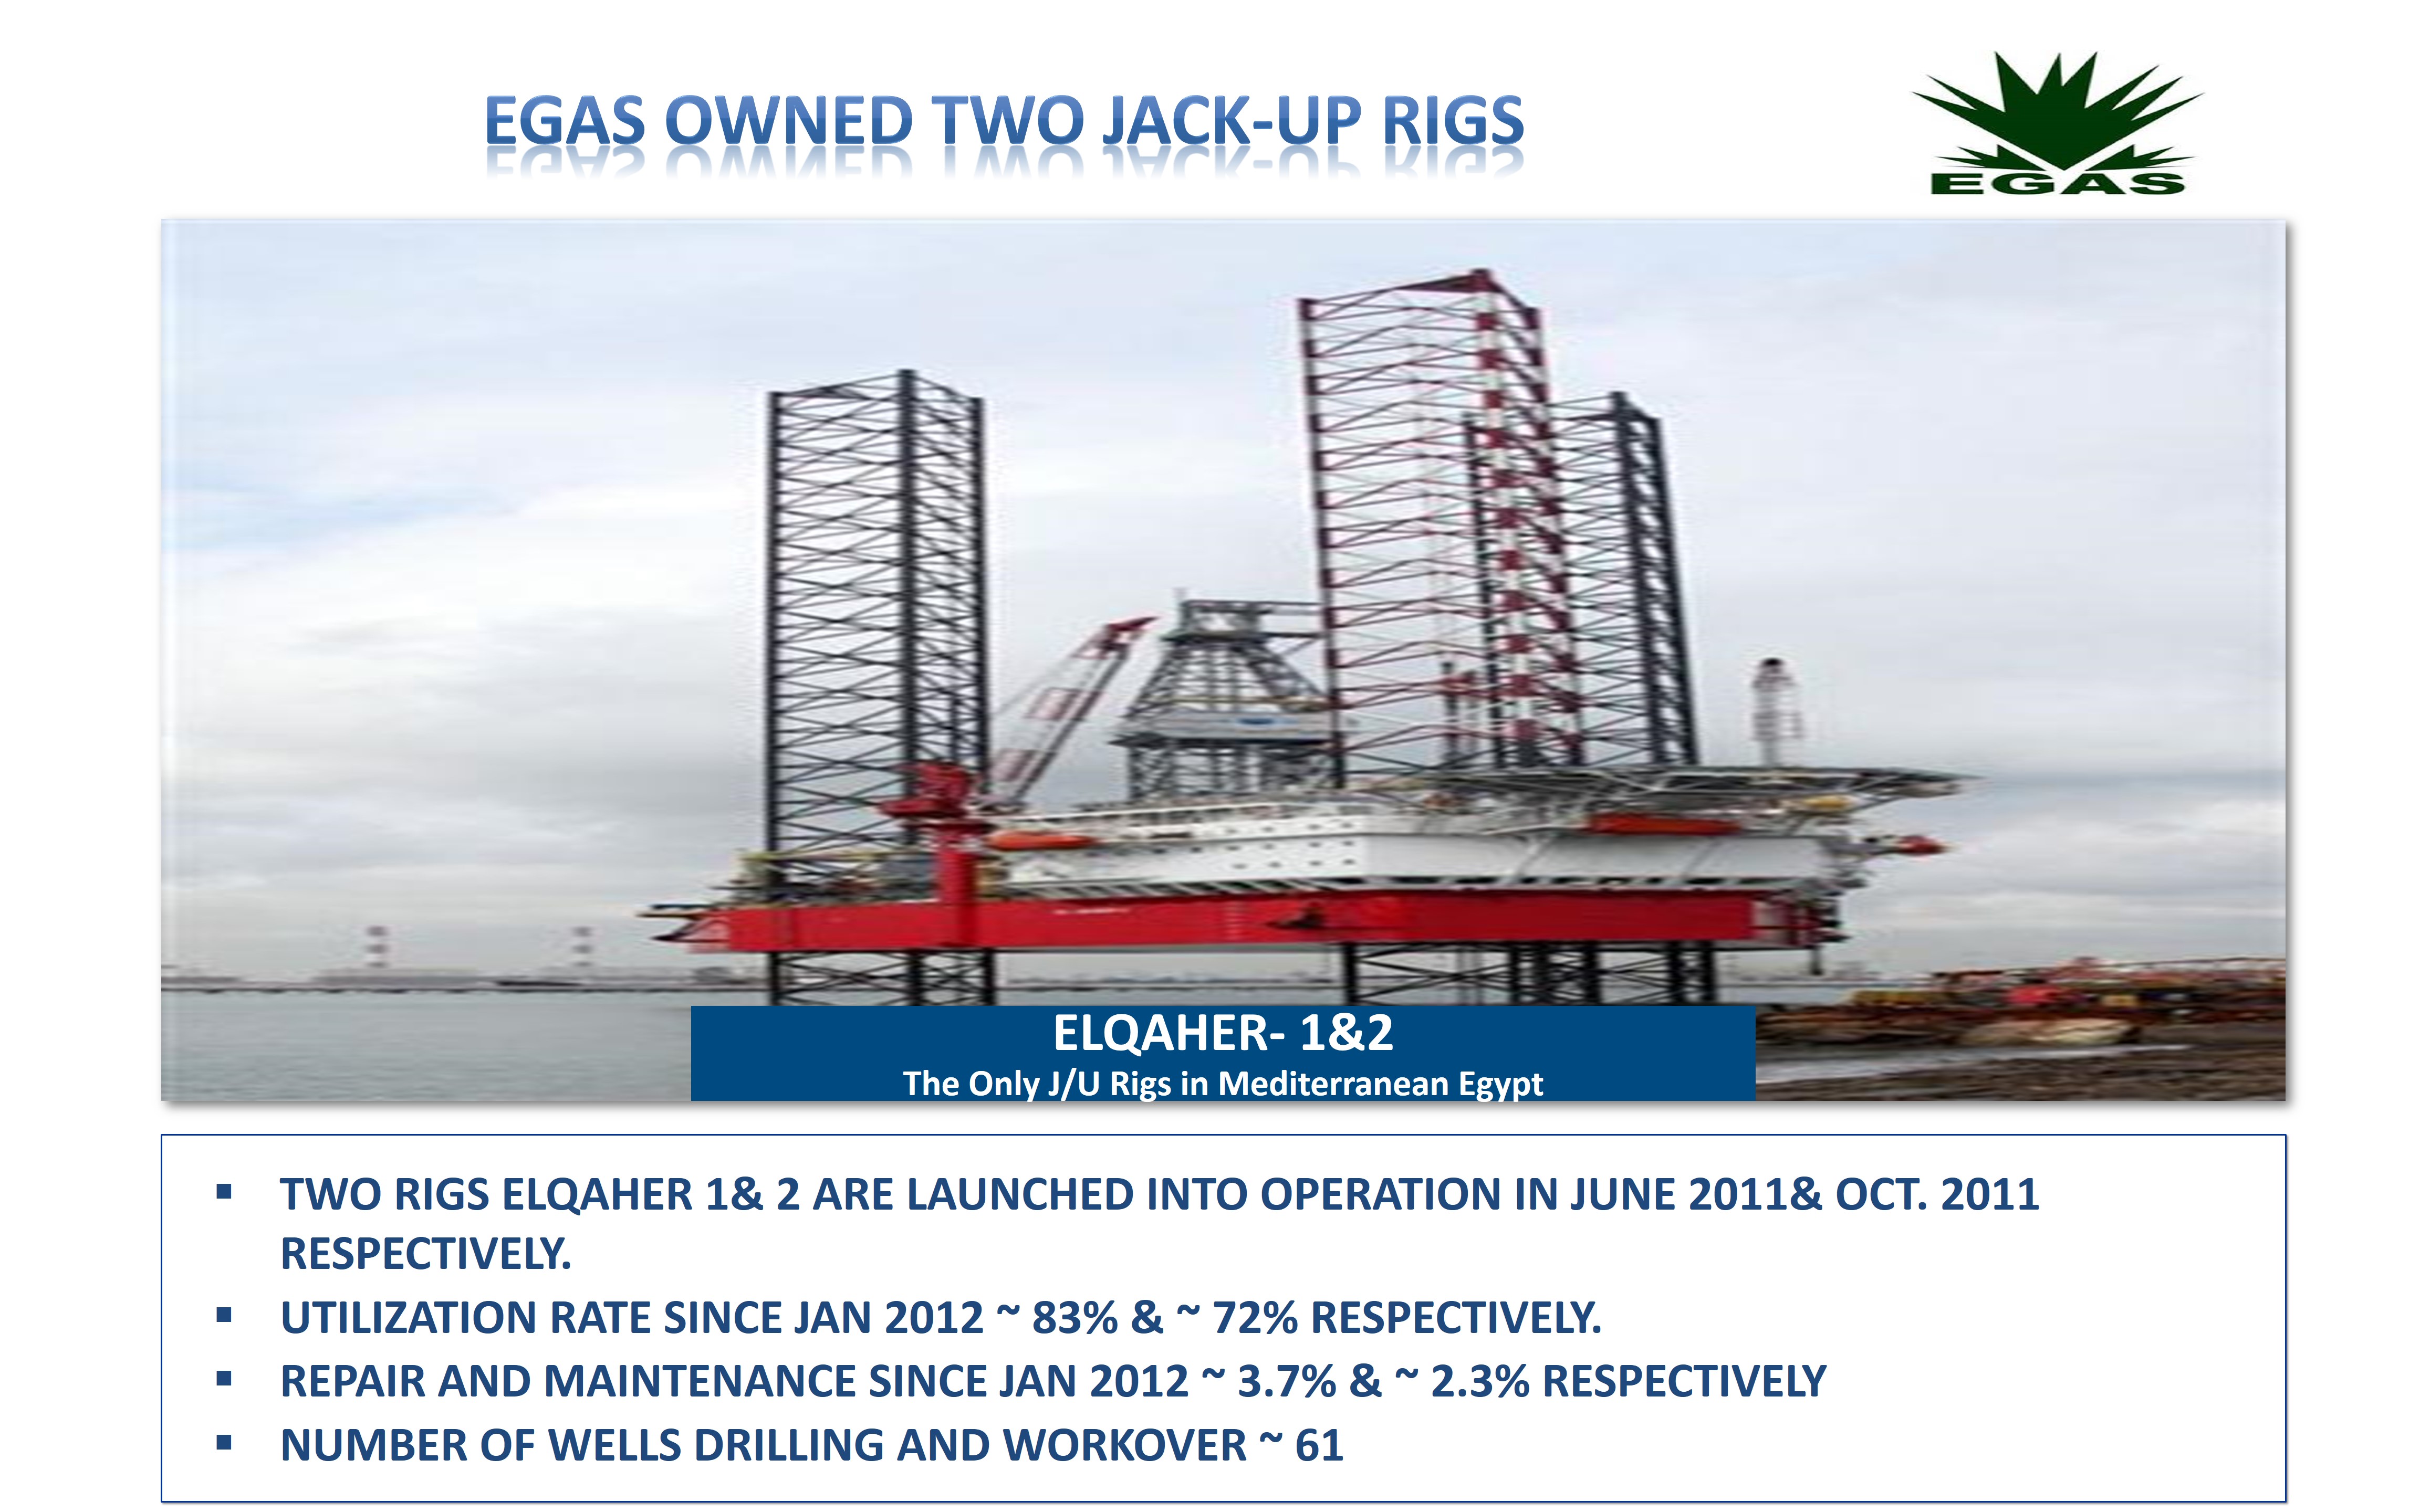 EGAS Owned Two Jack-up Rigs